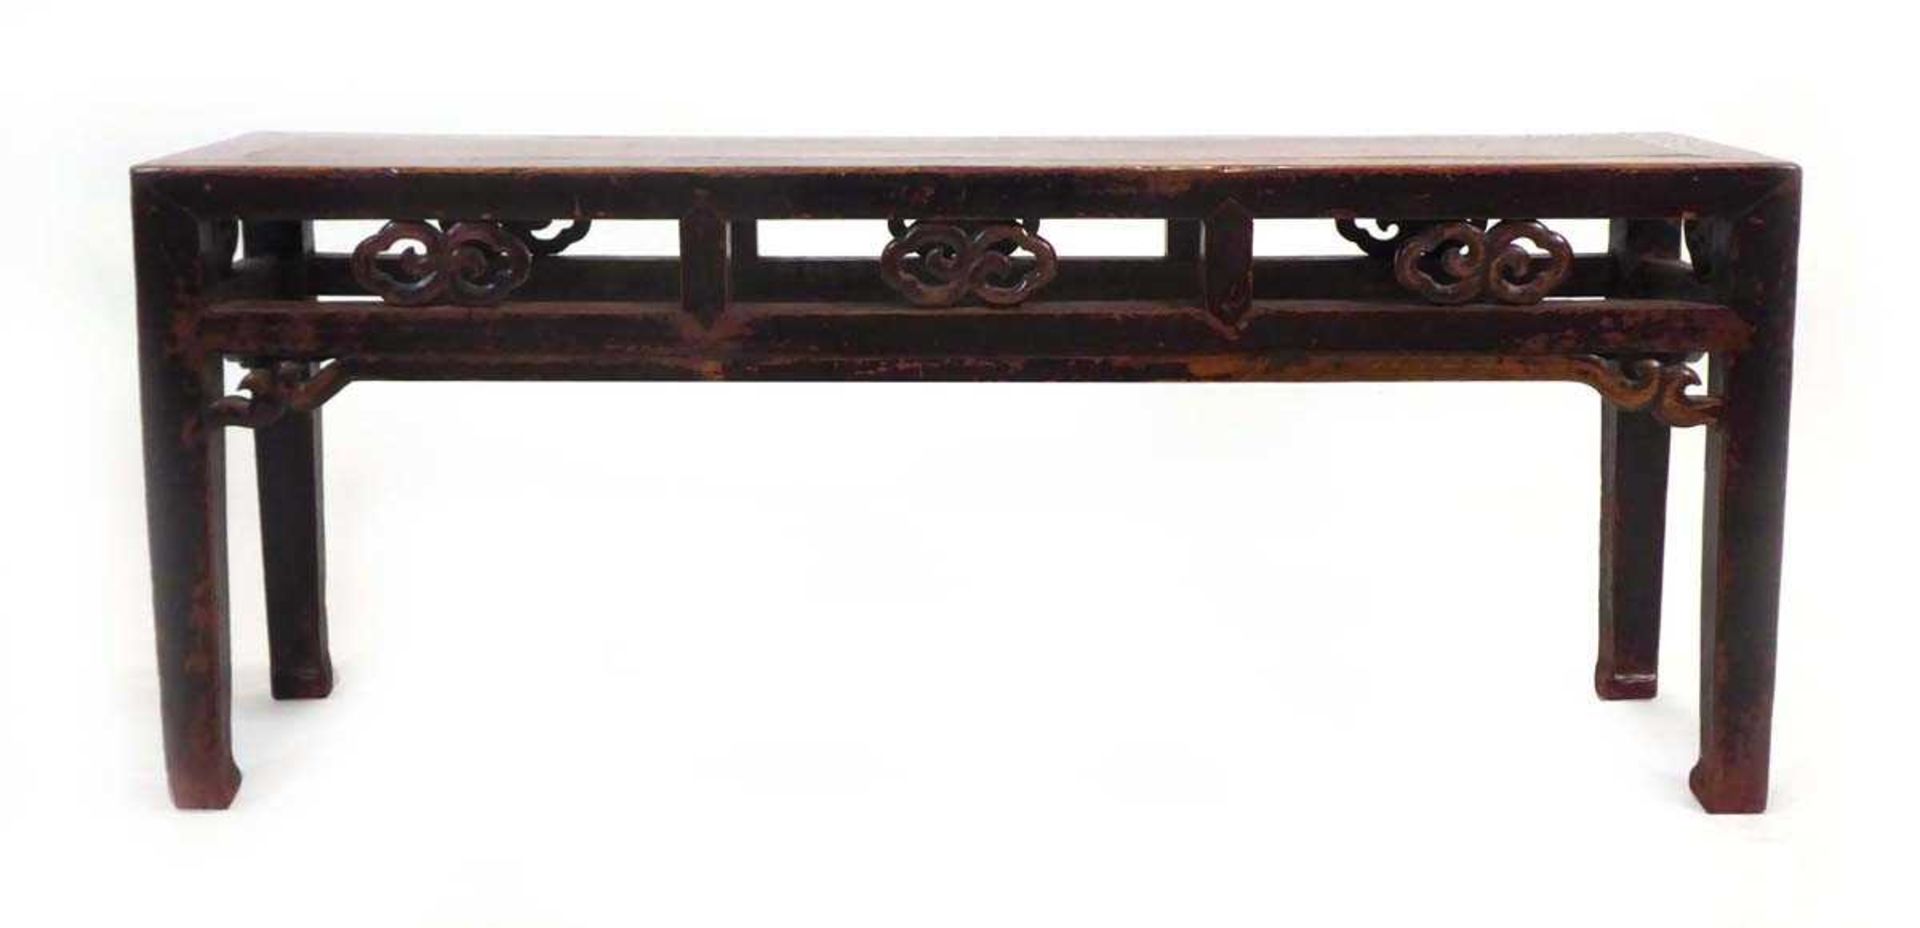 A Chinese hardwood bench of typical form, w. 120 cm, h. 48 cm, d. 32 cm *from the collection of